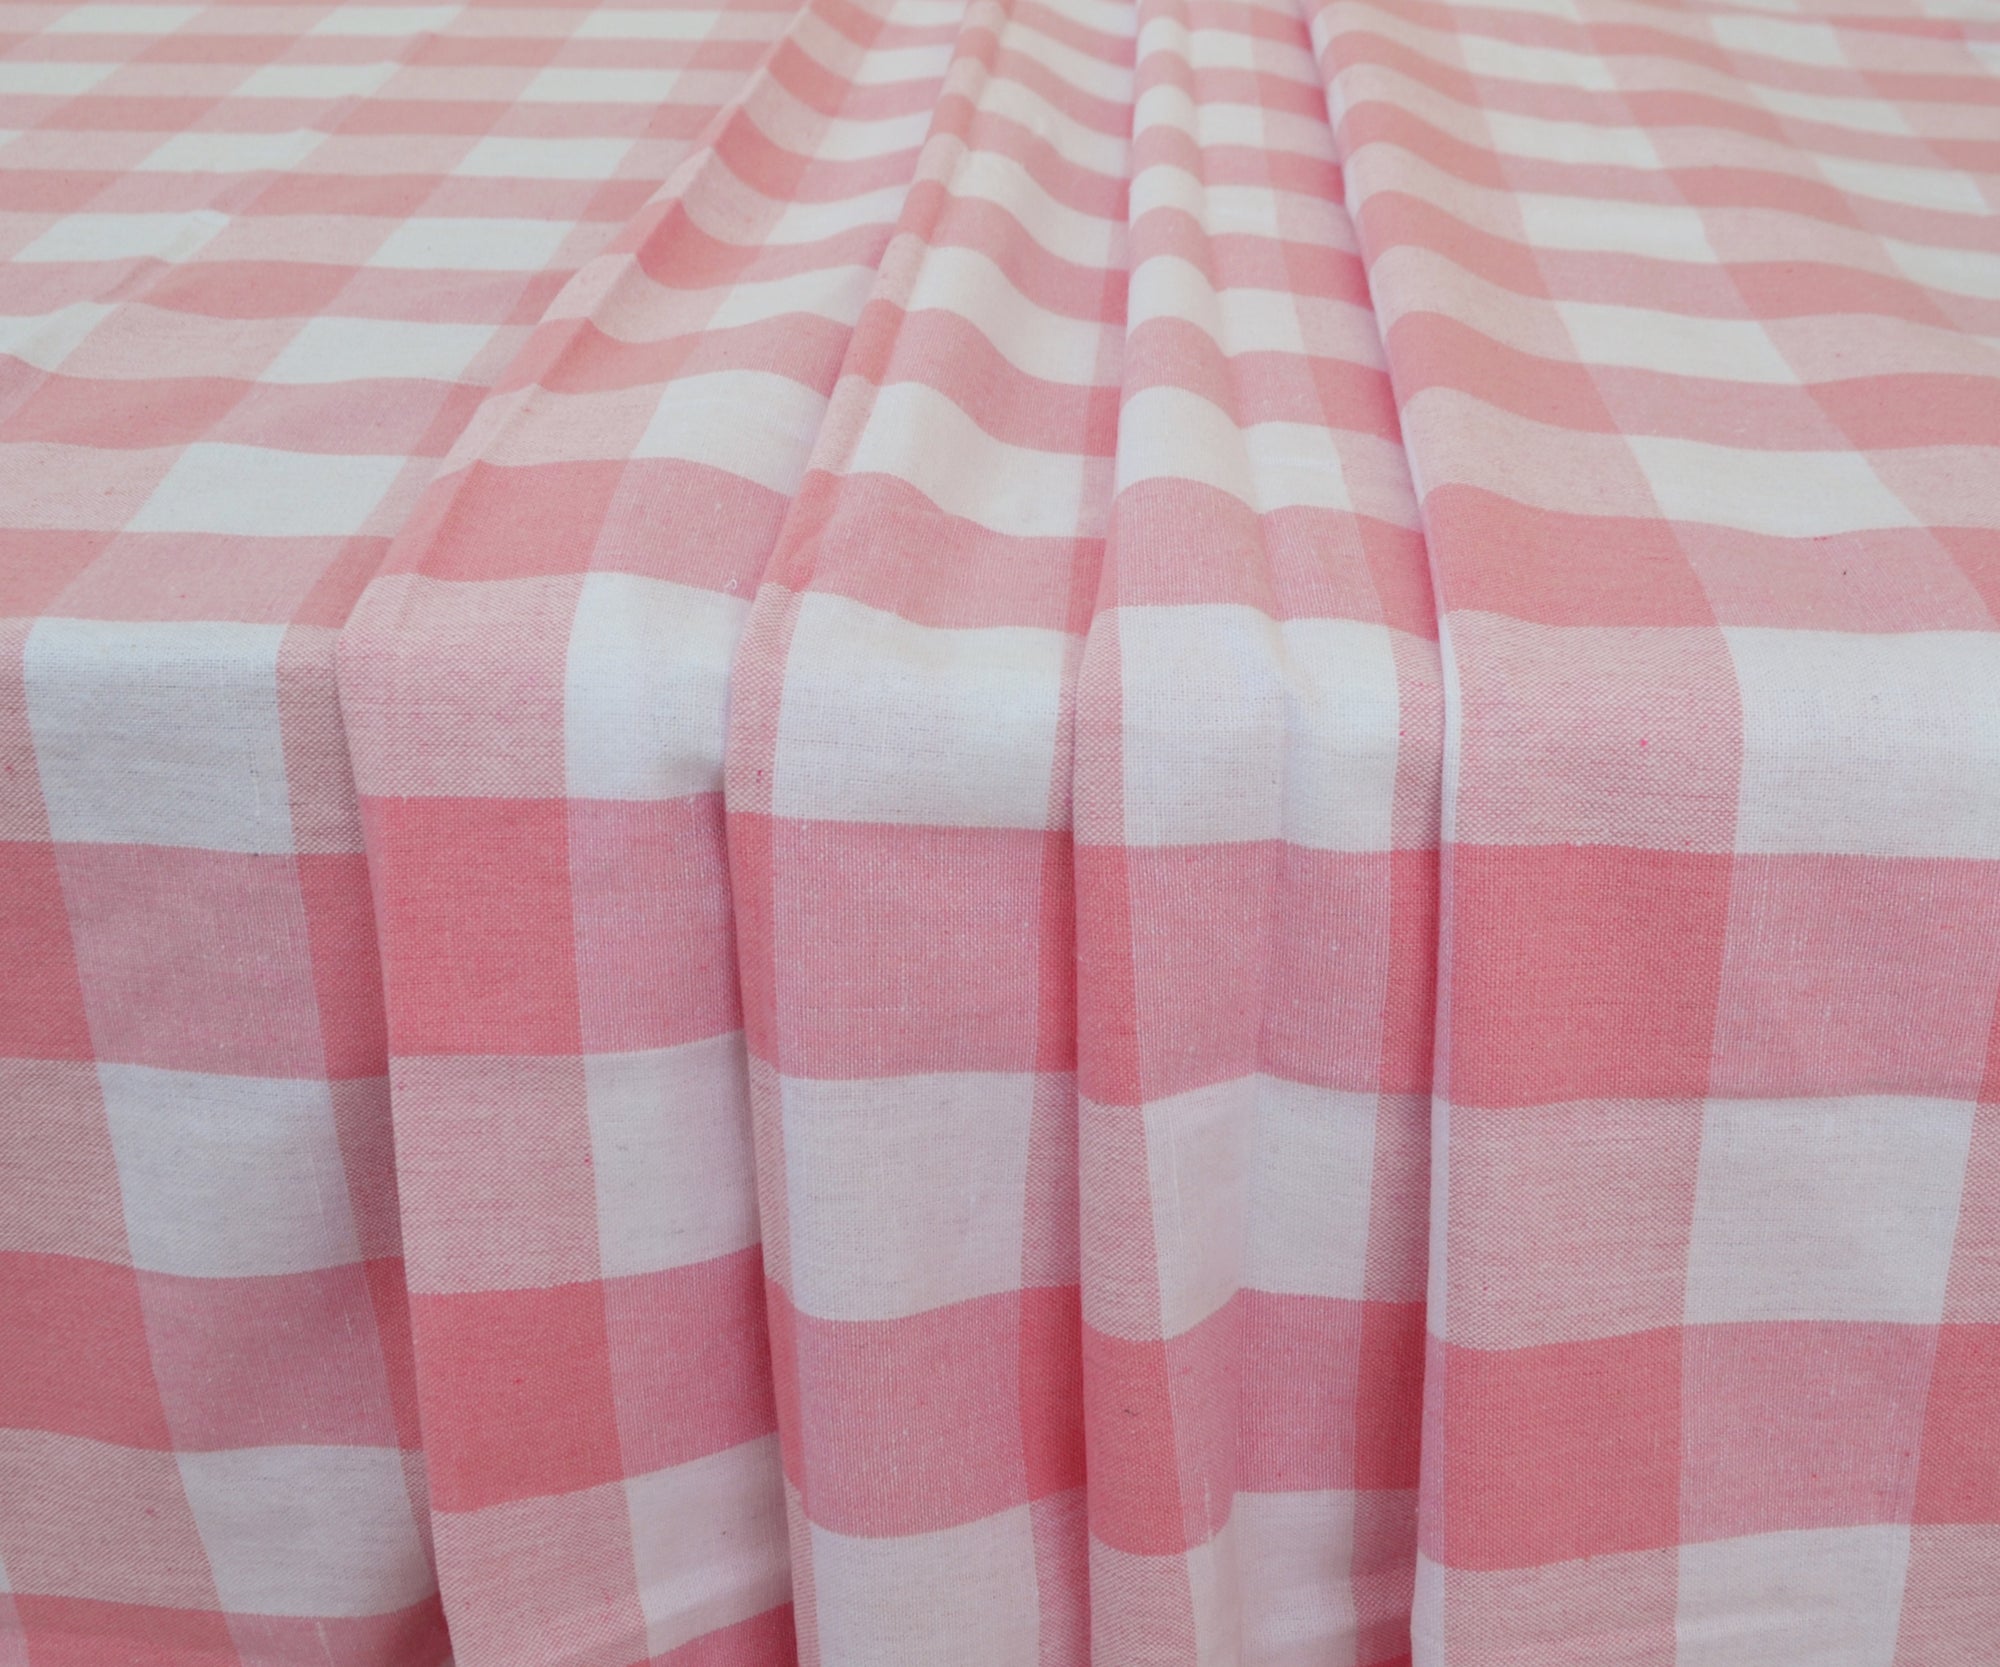 How to fold a rectangle tablecloth?